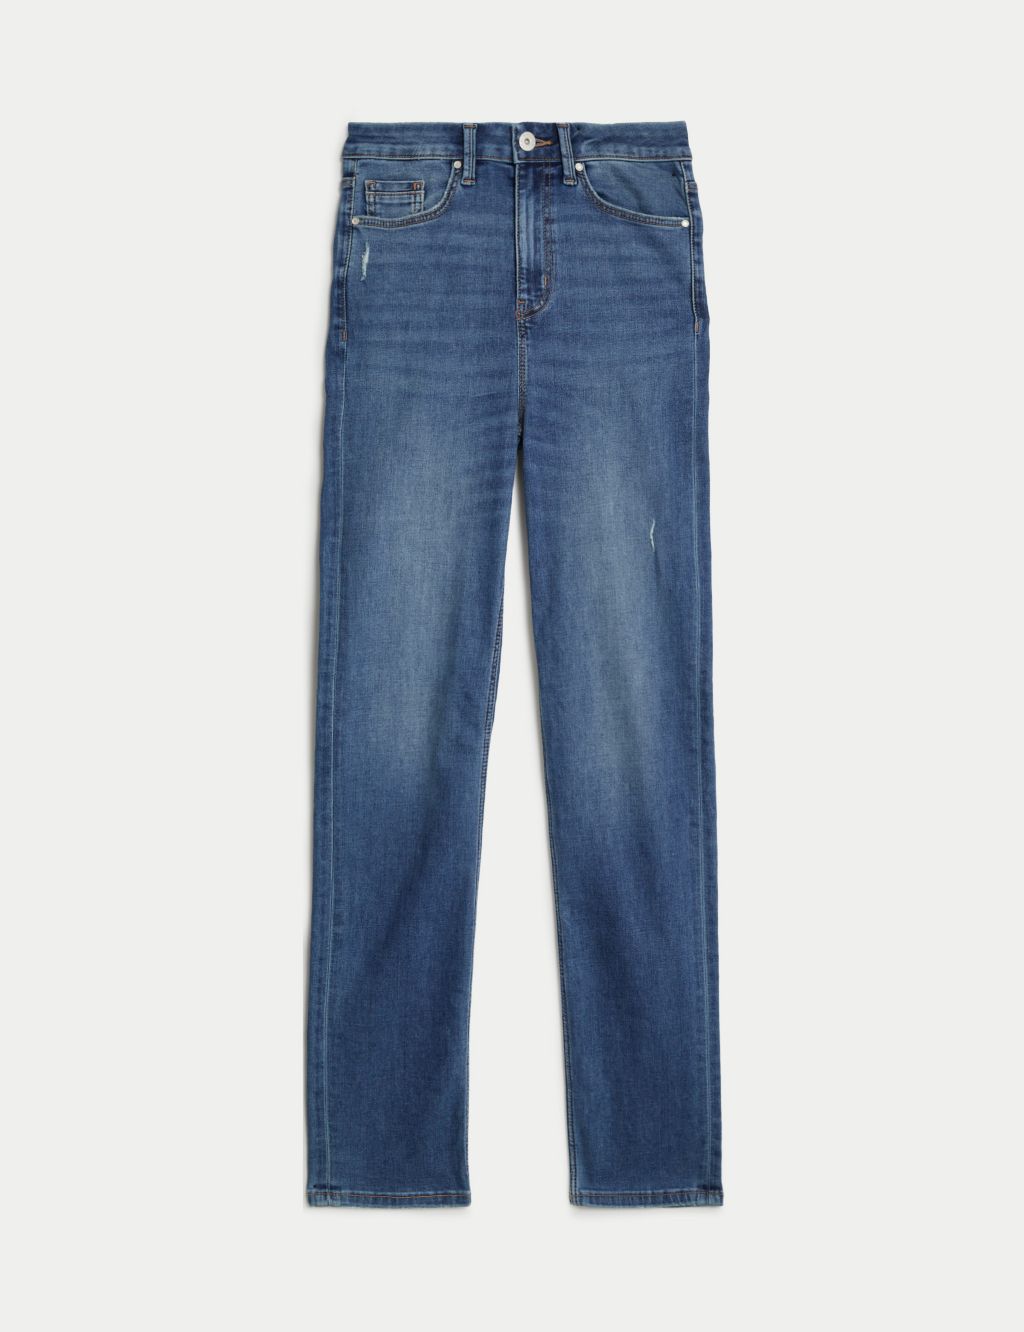 Sienna Supersoft Straight Leg Jeans 1 of 5